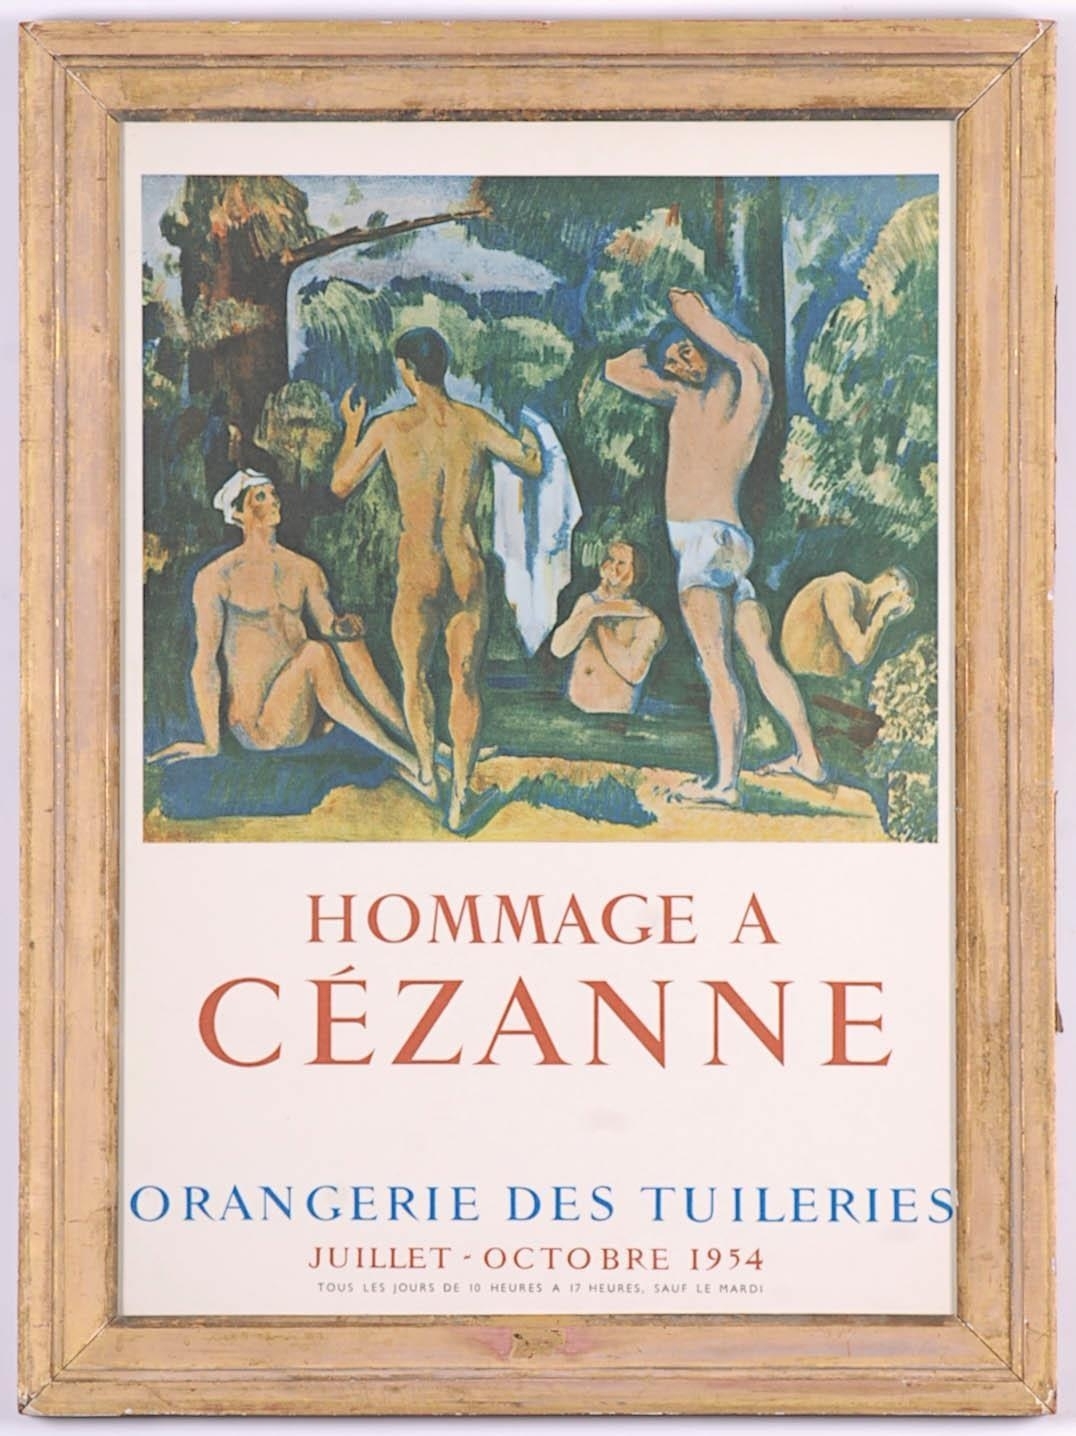 Homage to Cezanne by Paul Cézanne